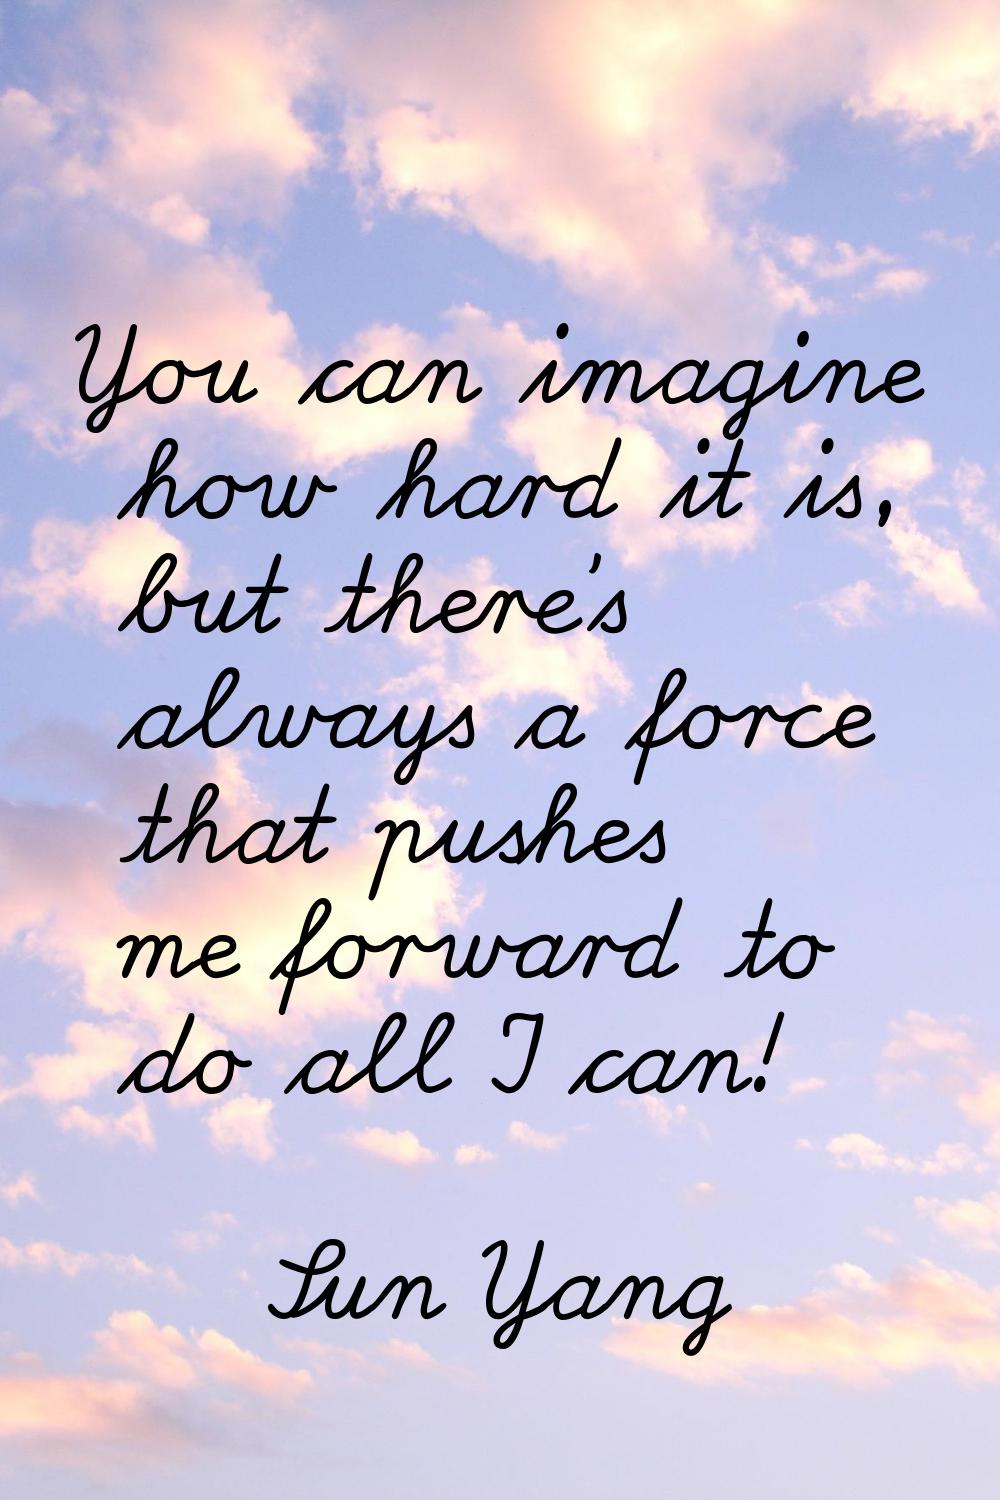 You can imagine how hard it is, but there's always a force that pushes me forward to do all I can!